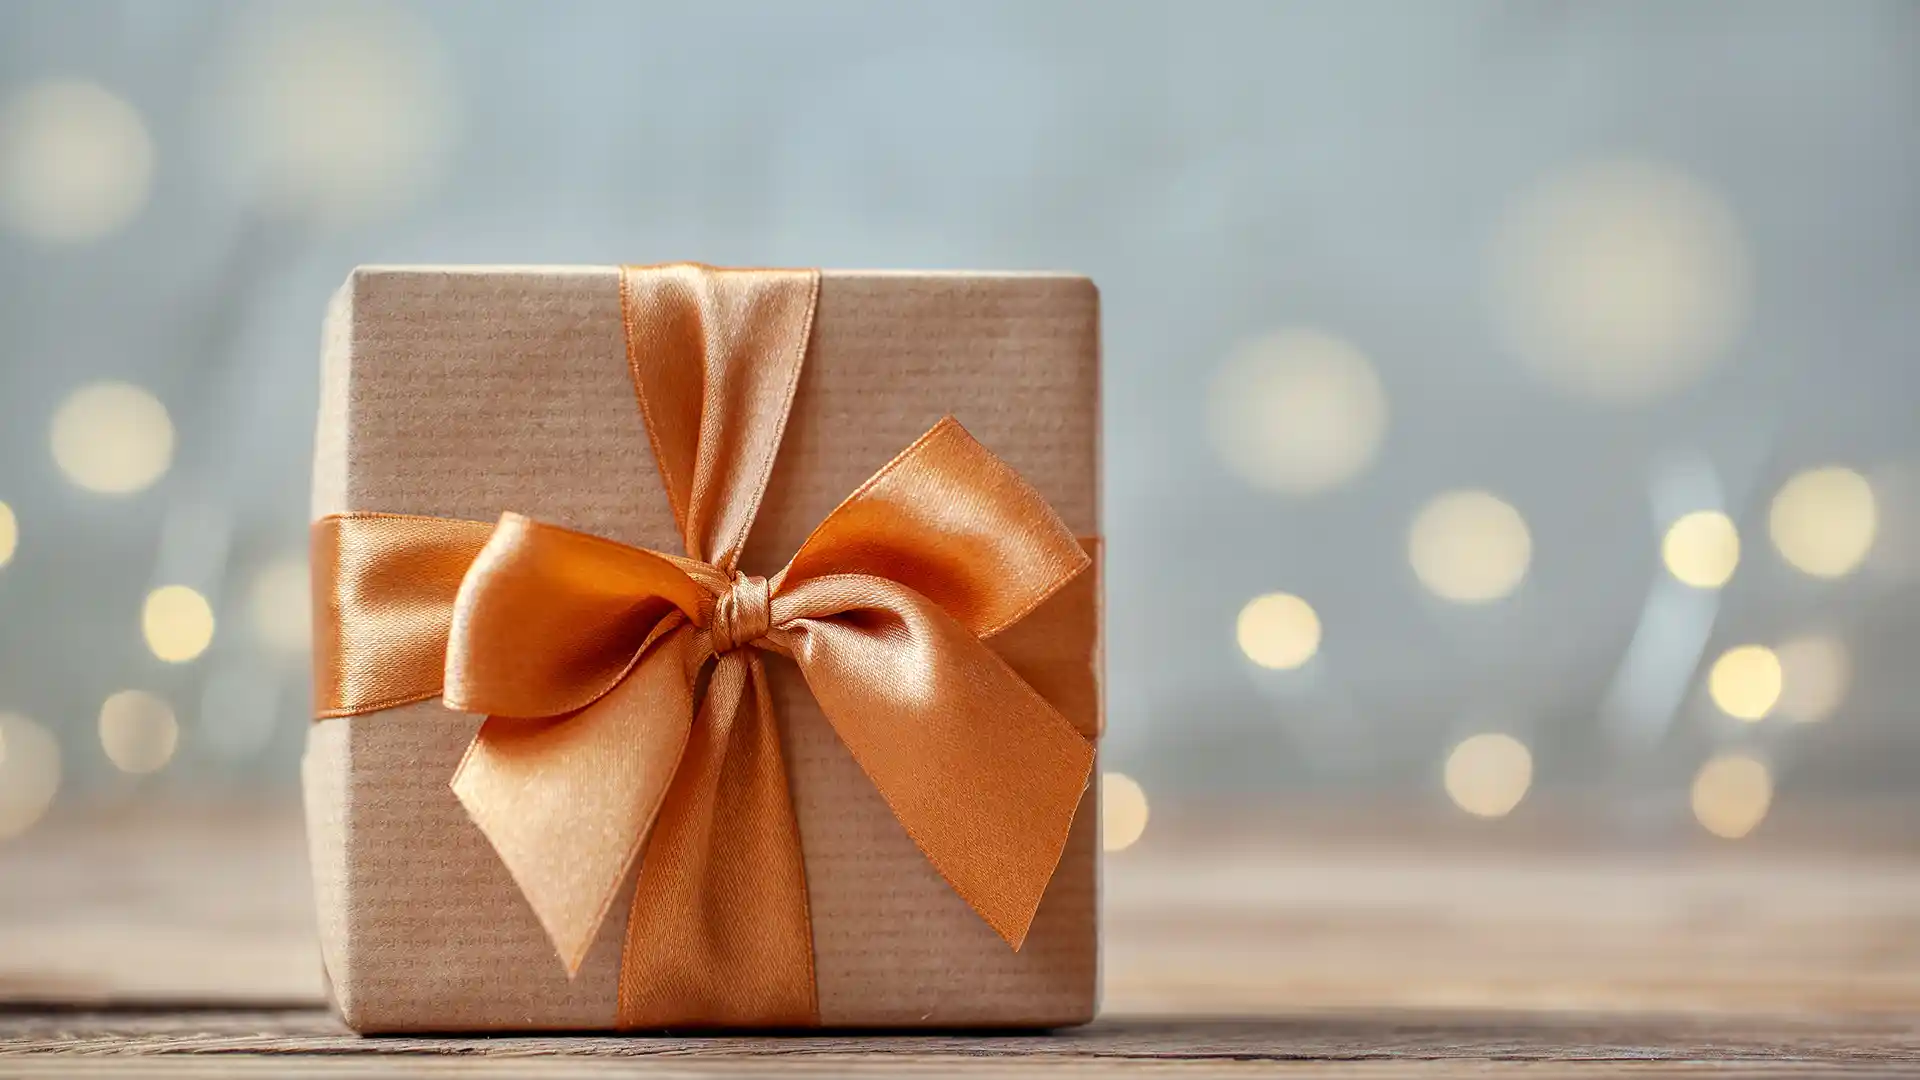 View of gift box wrapped in orange bow.